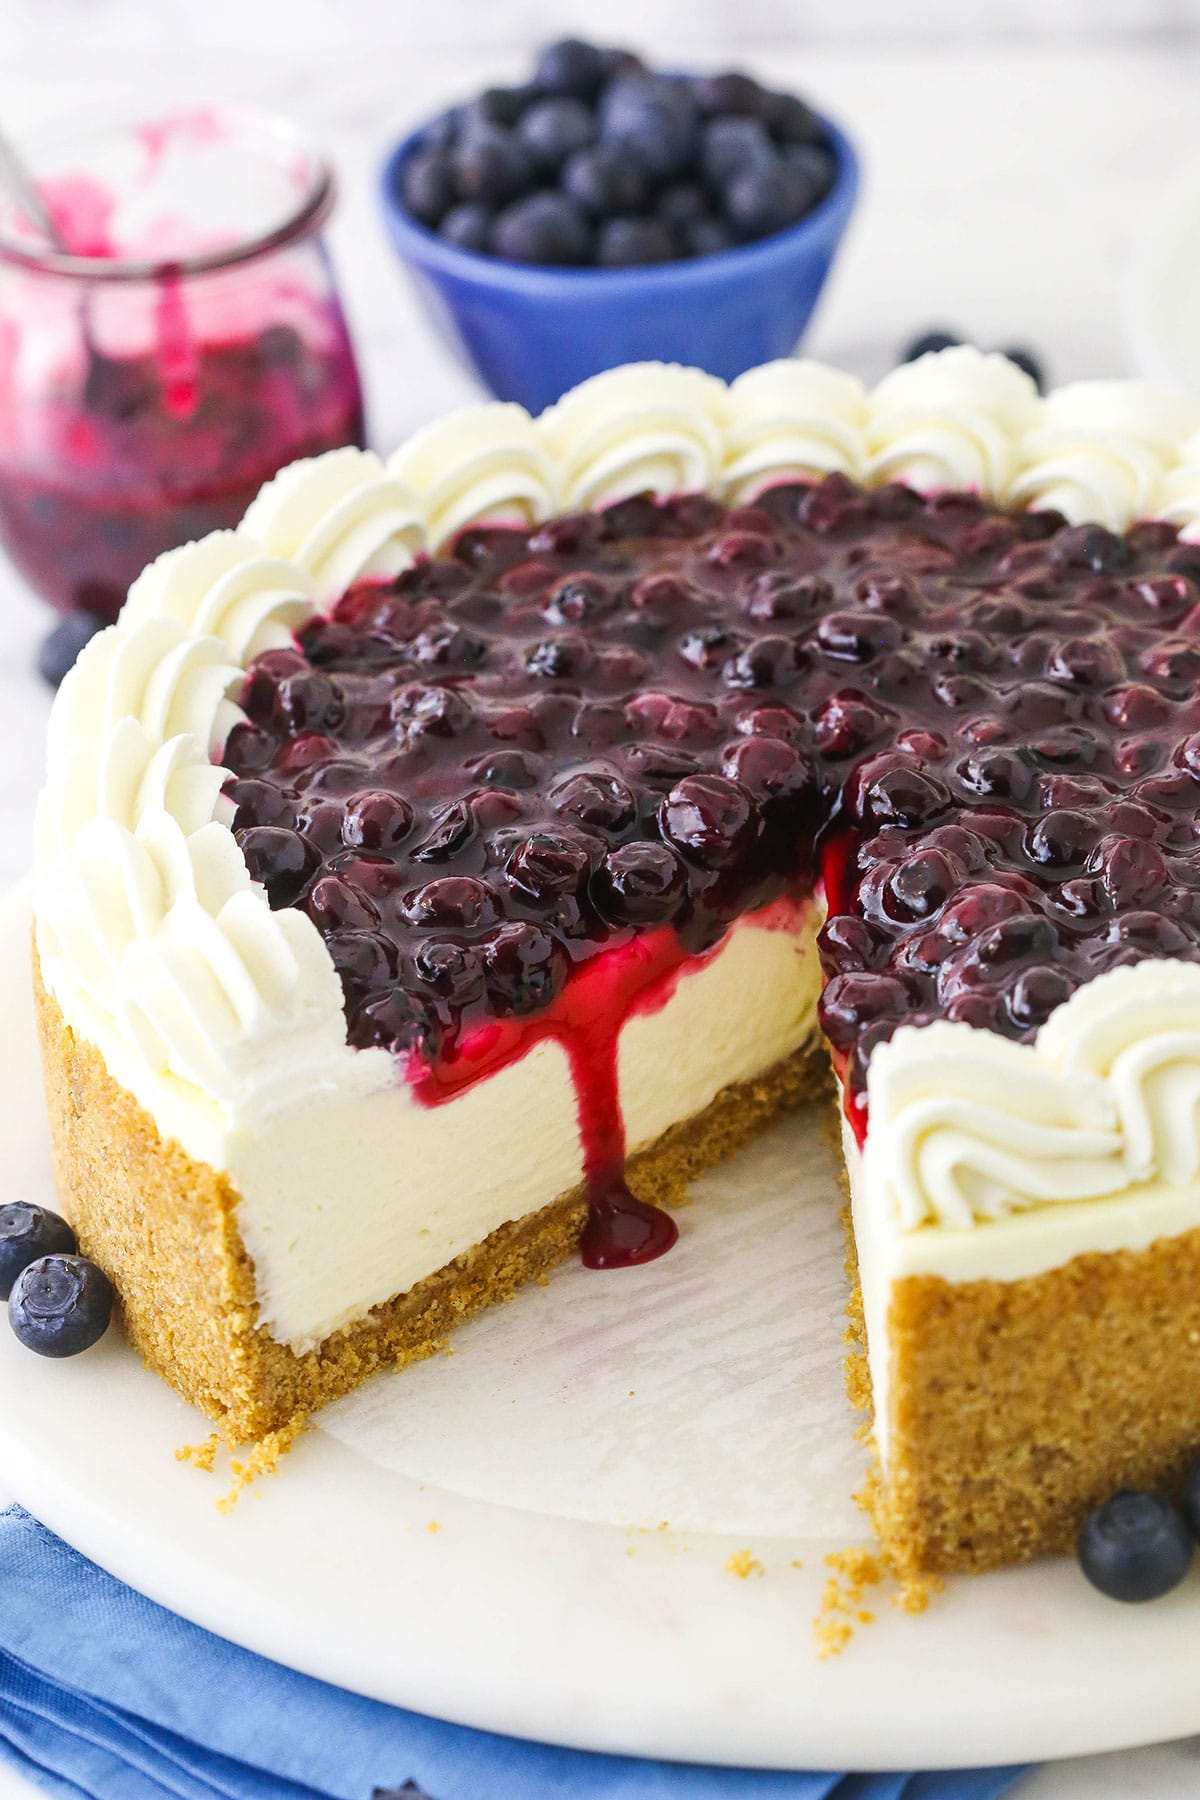 A blueberry cheesecake with a graham cracker crust on a serving platter with one large slice removed from the cake